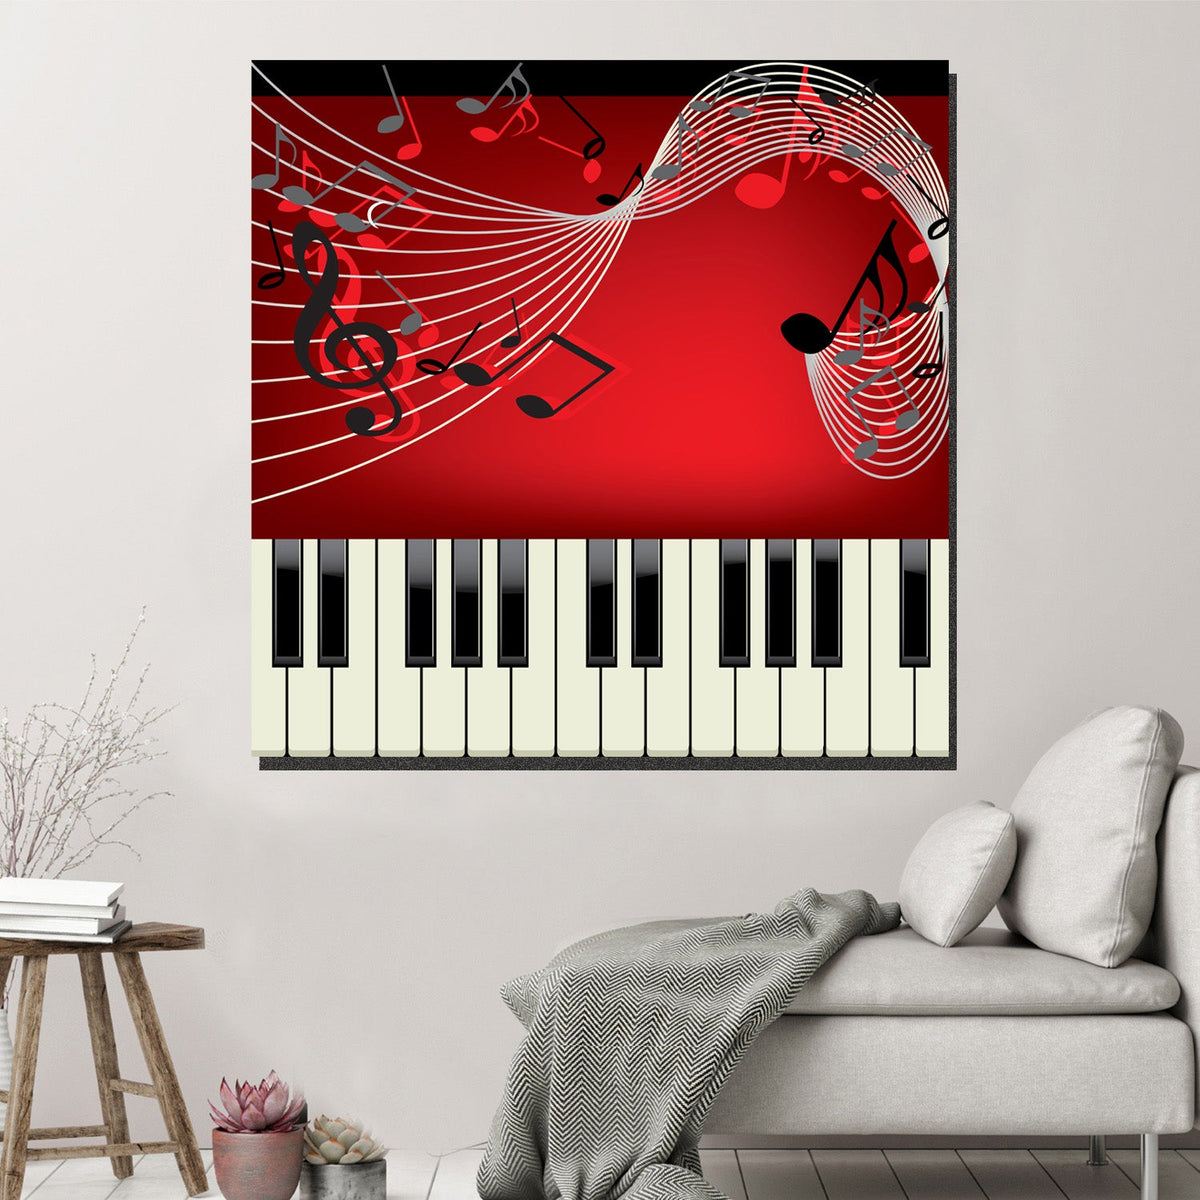 https://cdn.shopify.com/s/files/1/0387/9986/8044/products/PianoandMusicalNotesCanvasArtprintStretched-2.jpg